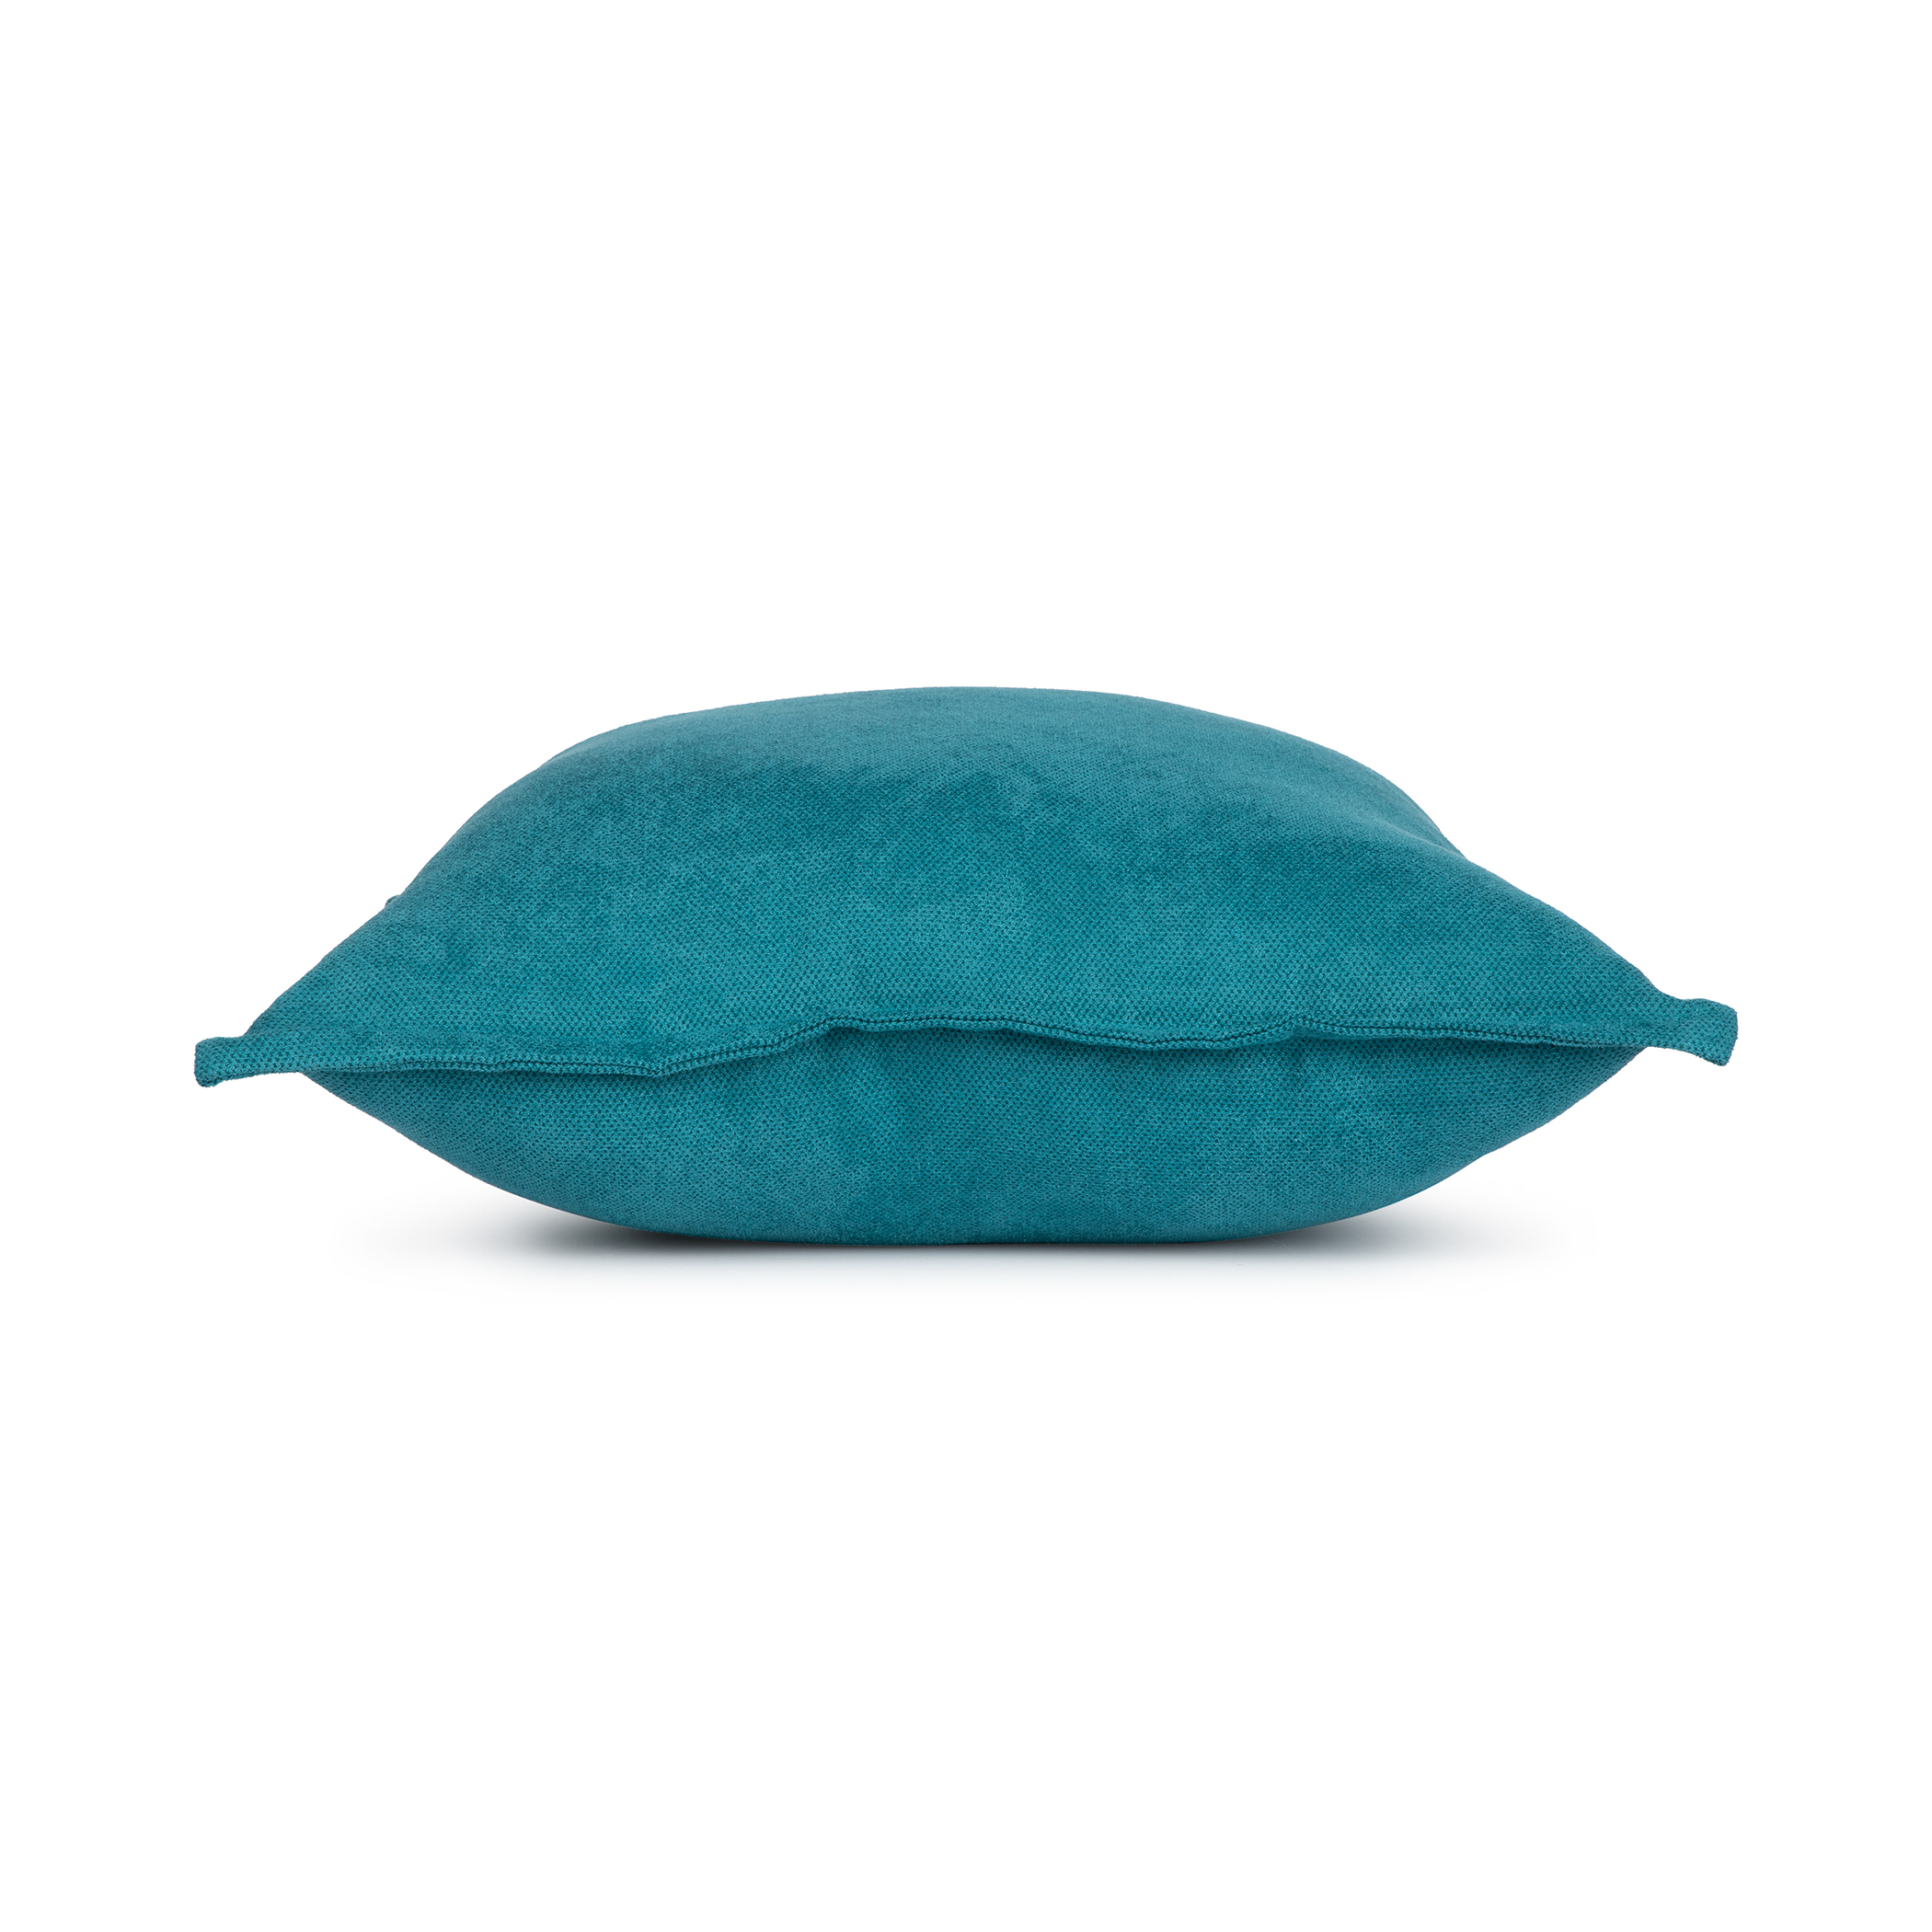 Mainstays Faux Suede Decorative Square Throw Pillow with Flange, 18" x 18", Peacock - image 2 of 4